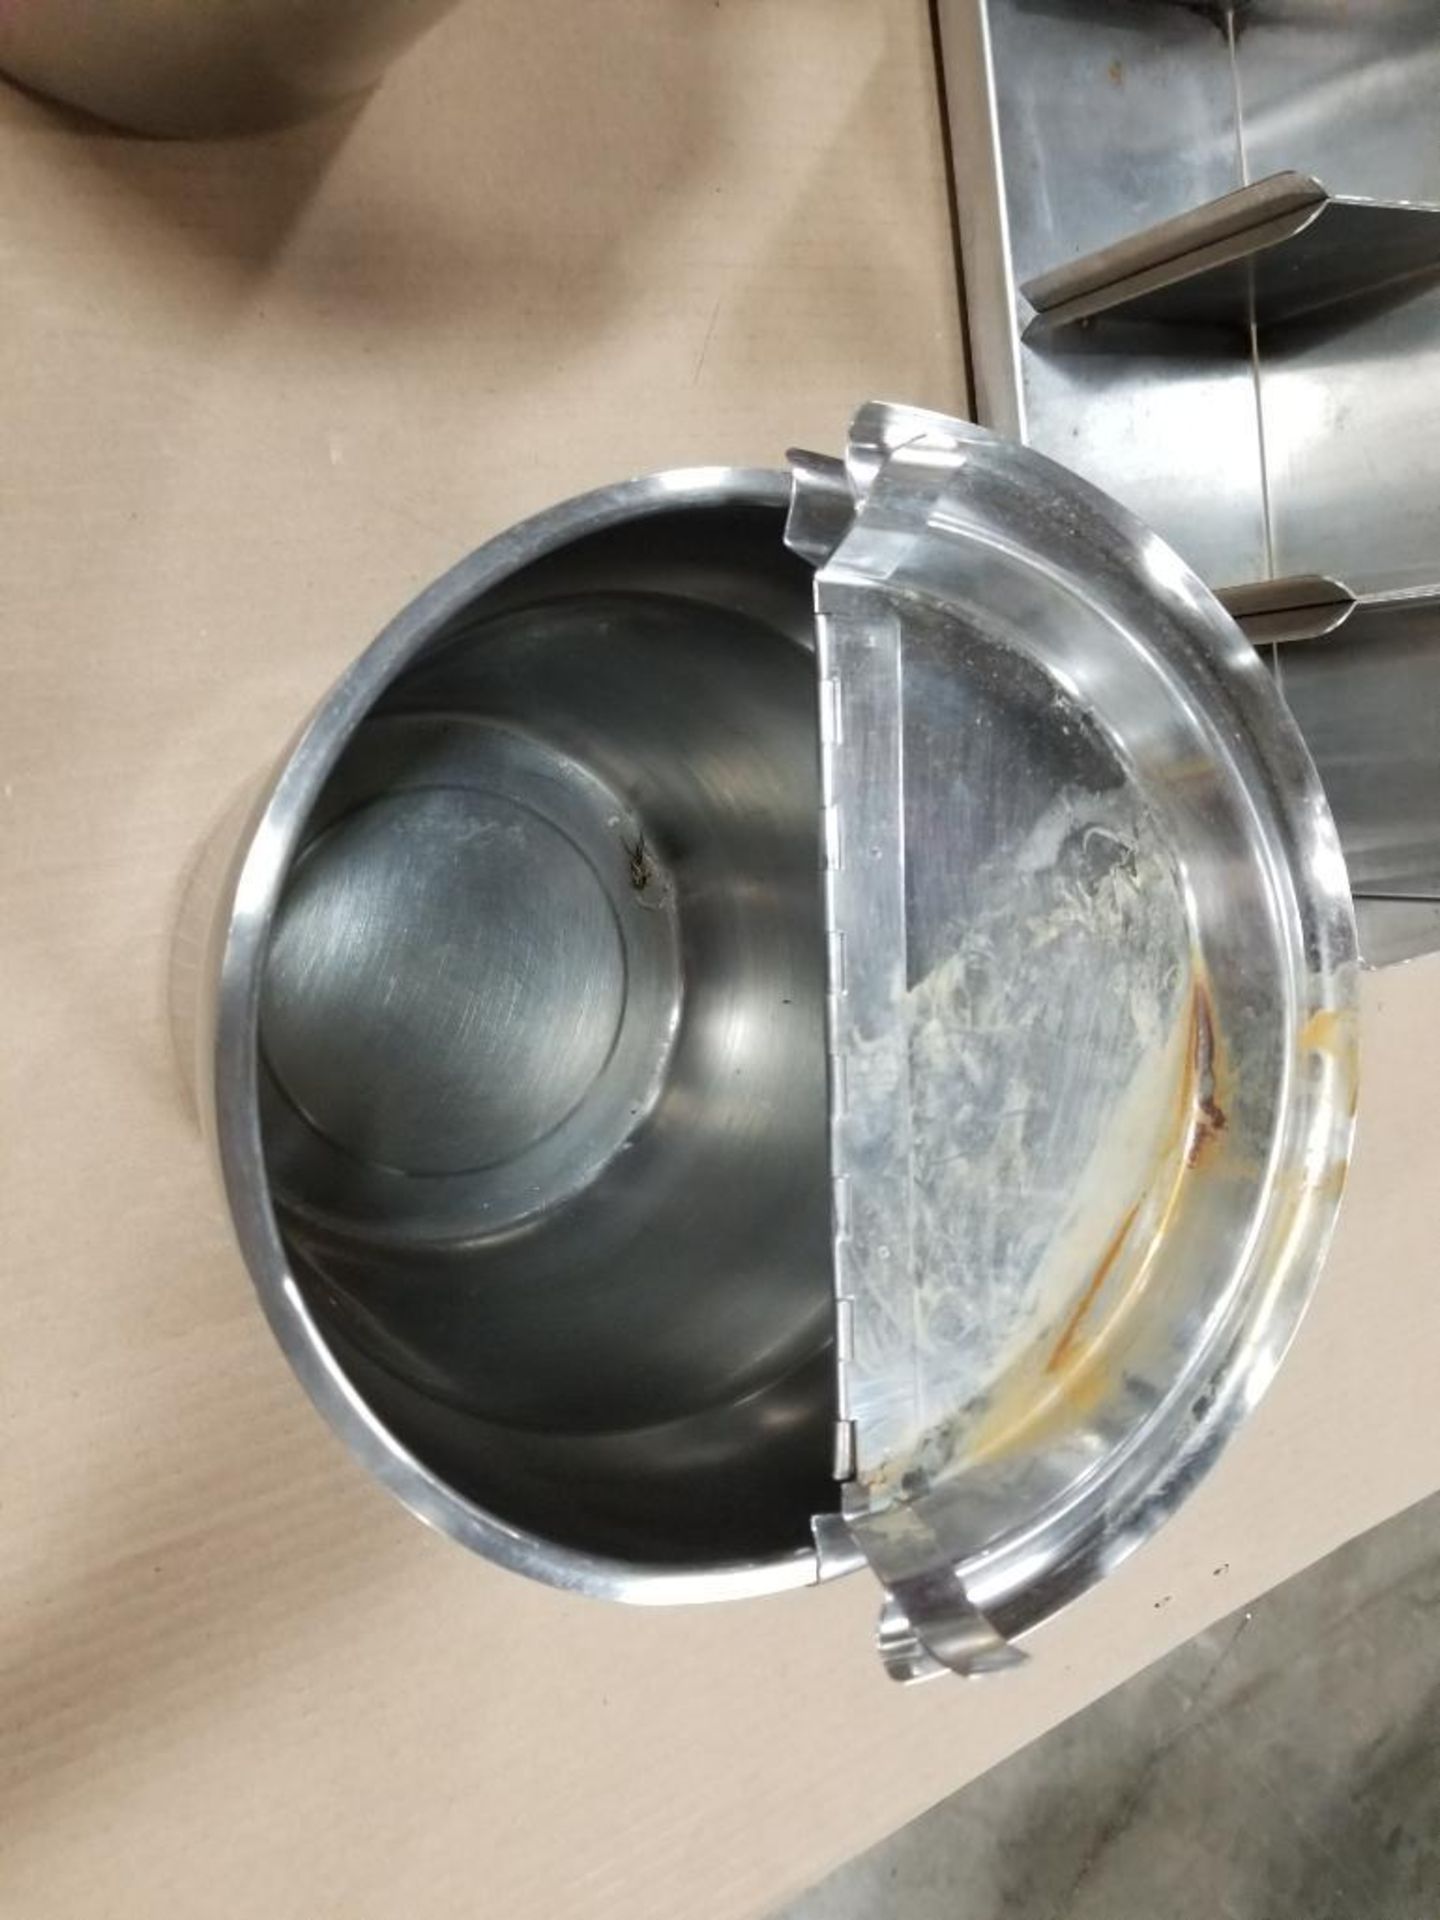 Stainless steel steam table and containers. - Image 10 of 16